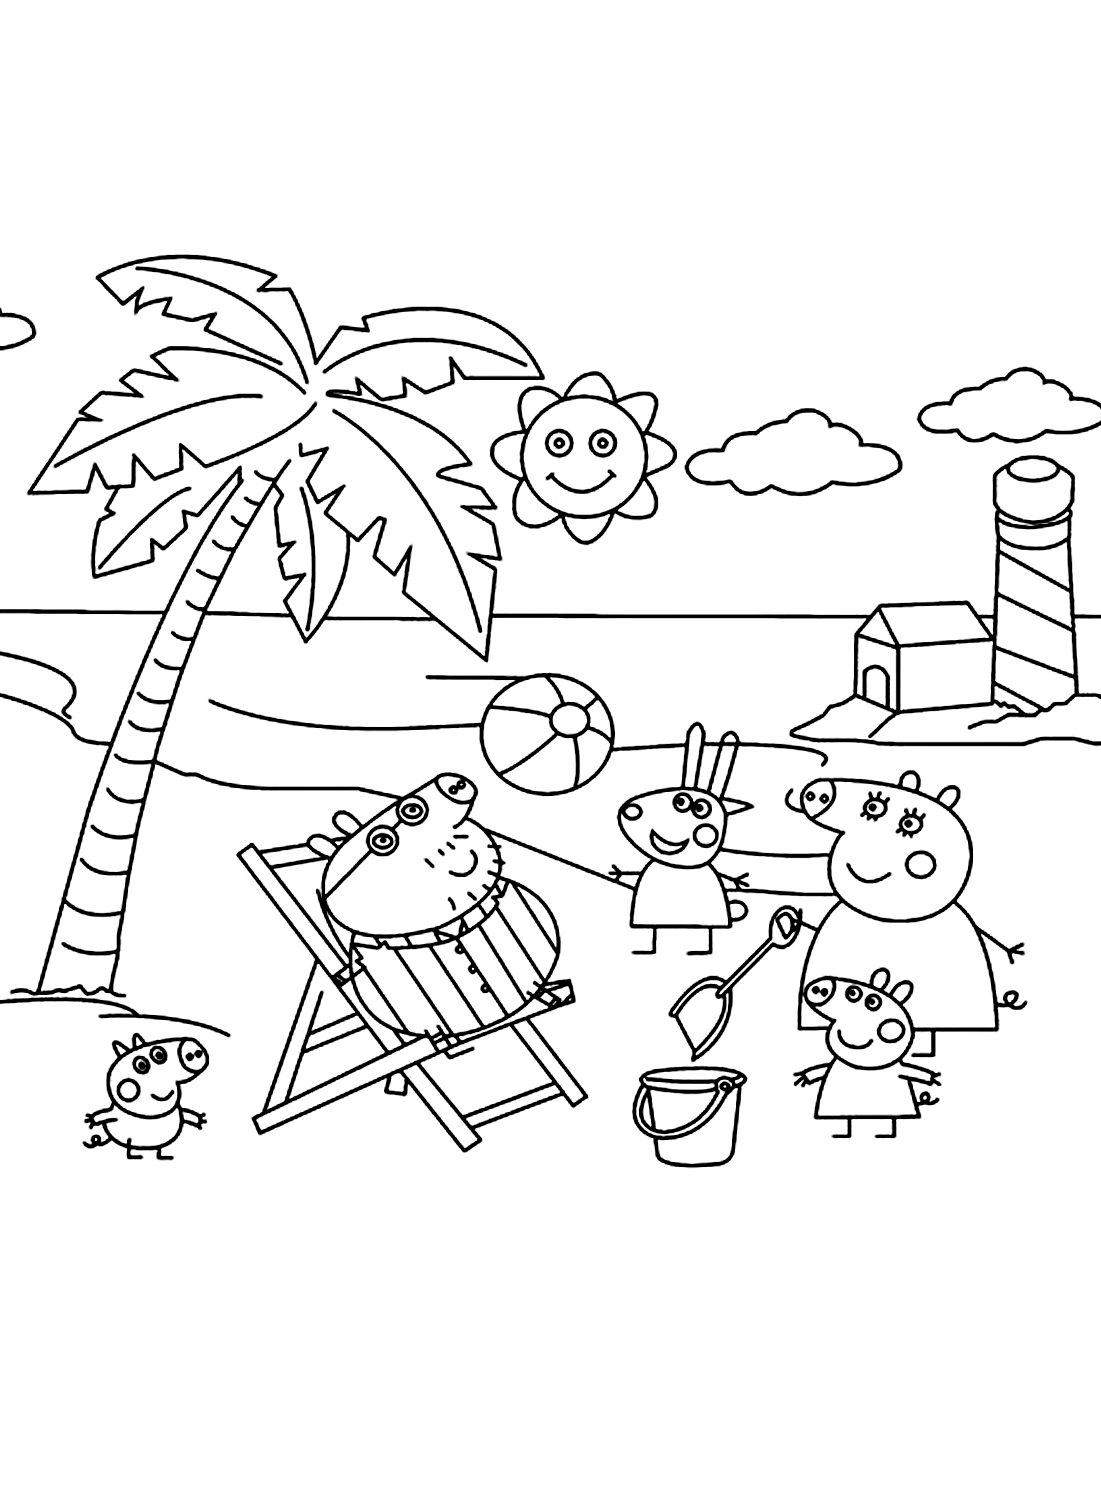 Coloring Page of Peppga Pig’s Family in Beach